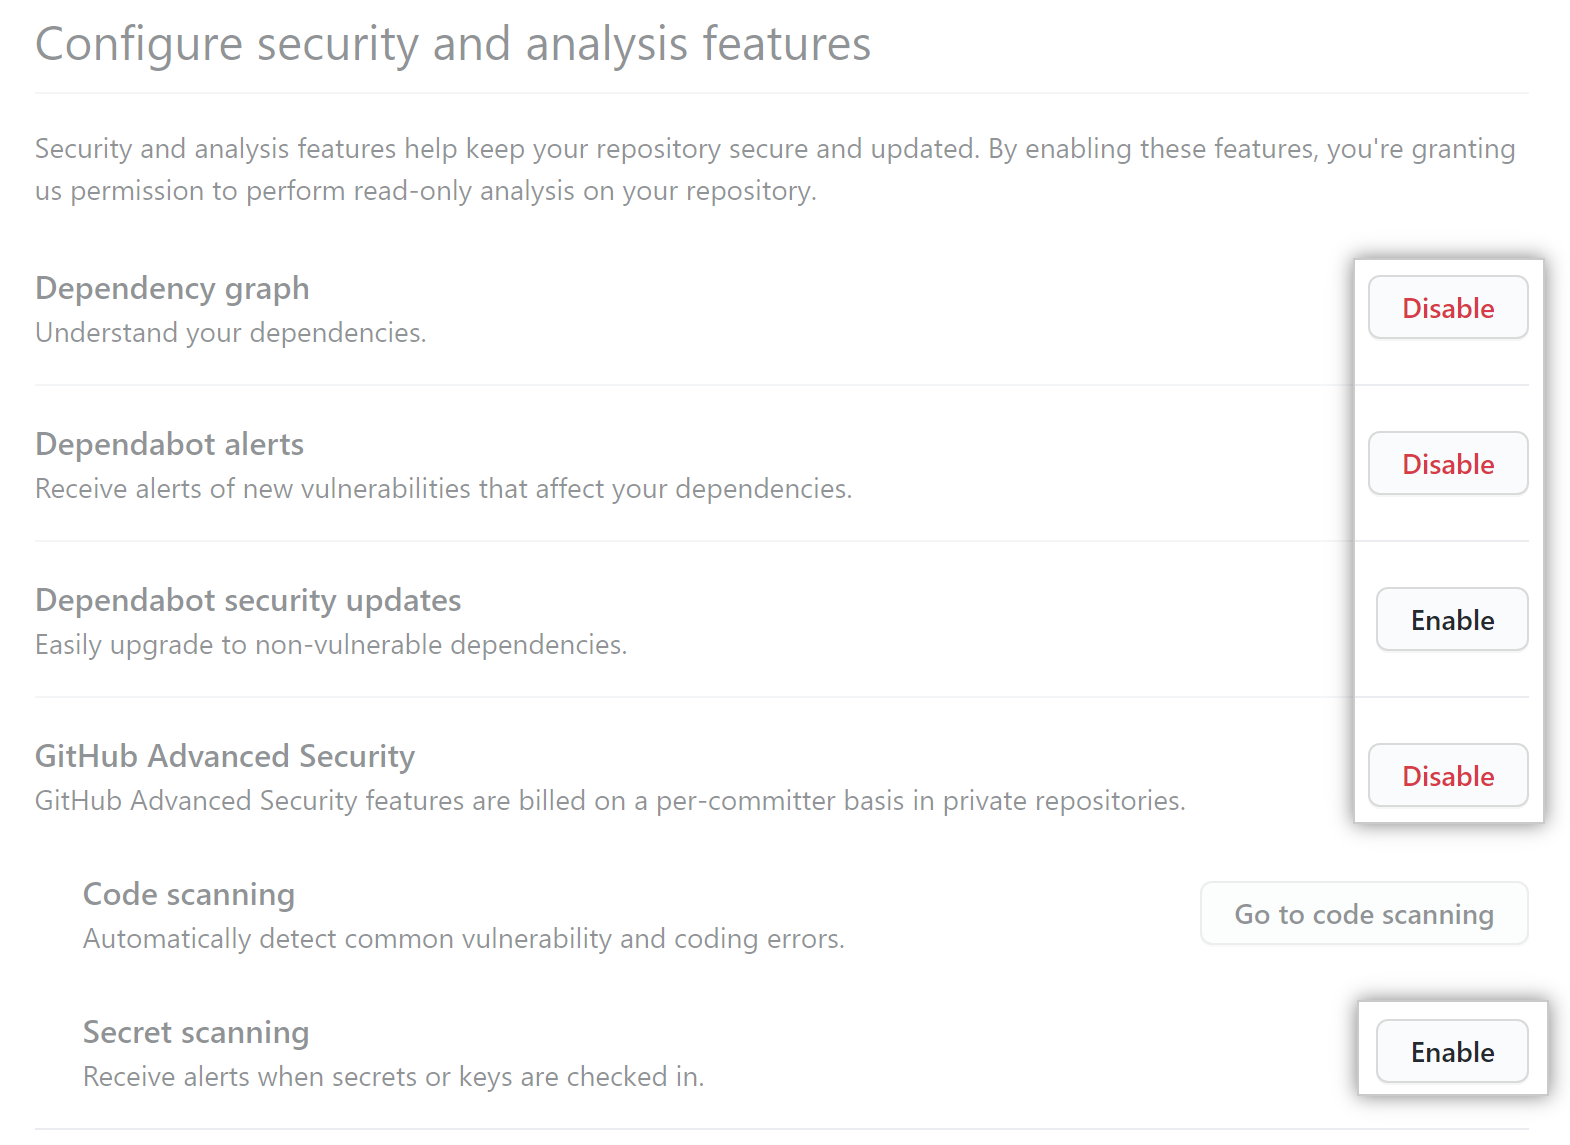 "Enable" or "Disable" button for "Configure security and analysis" features